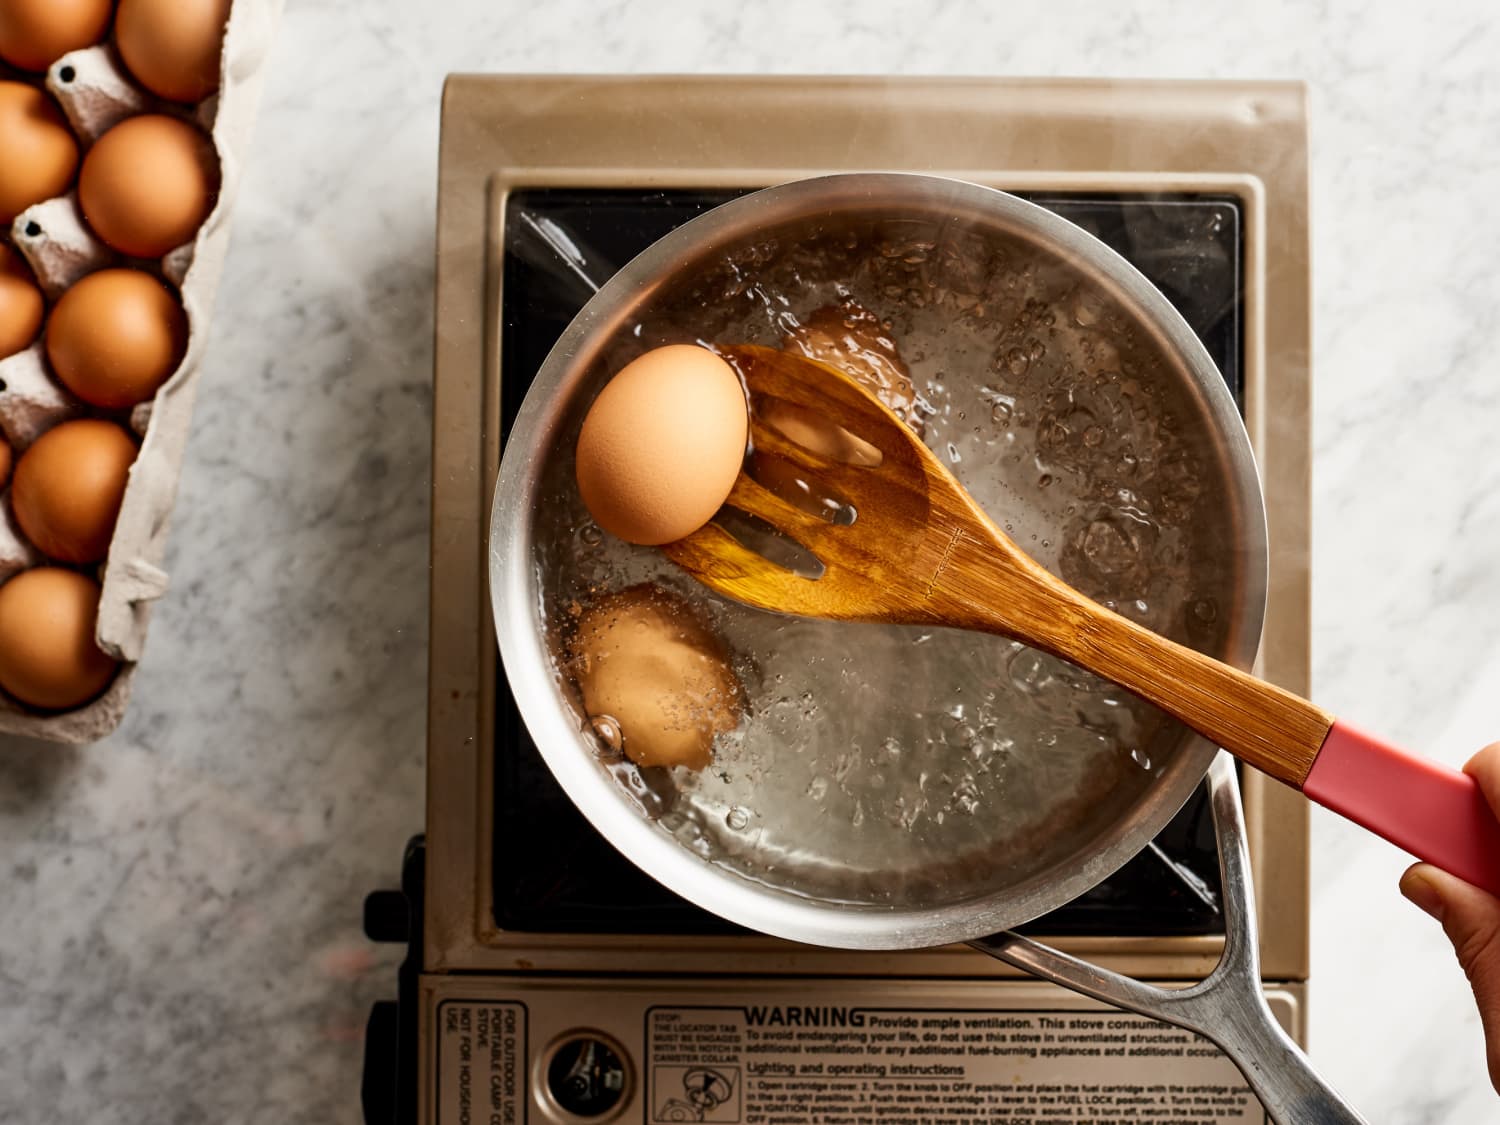 The Best Egg Gadgets You Can Buy Online